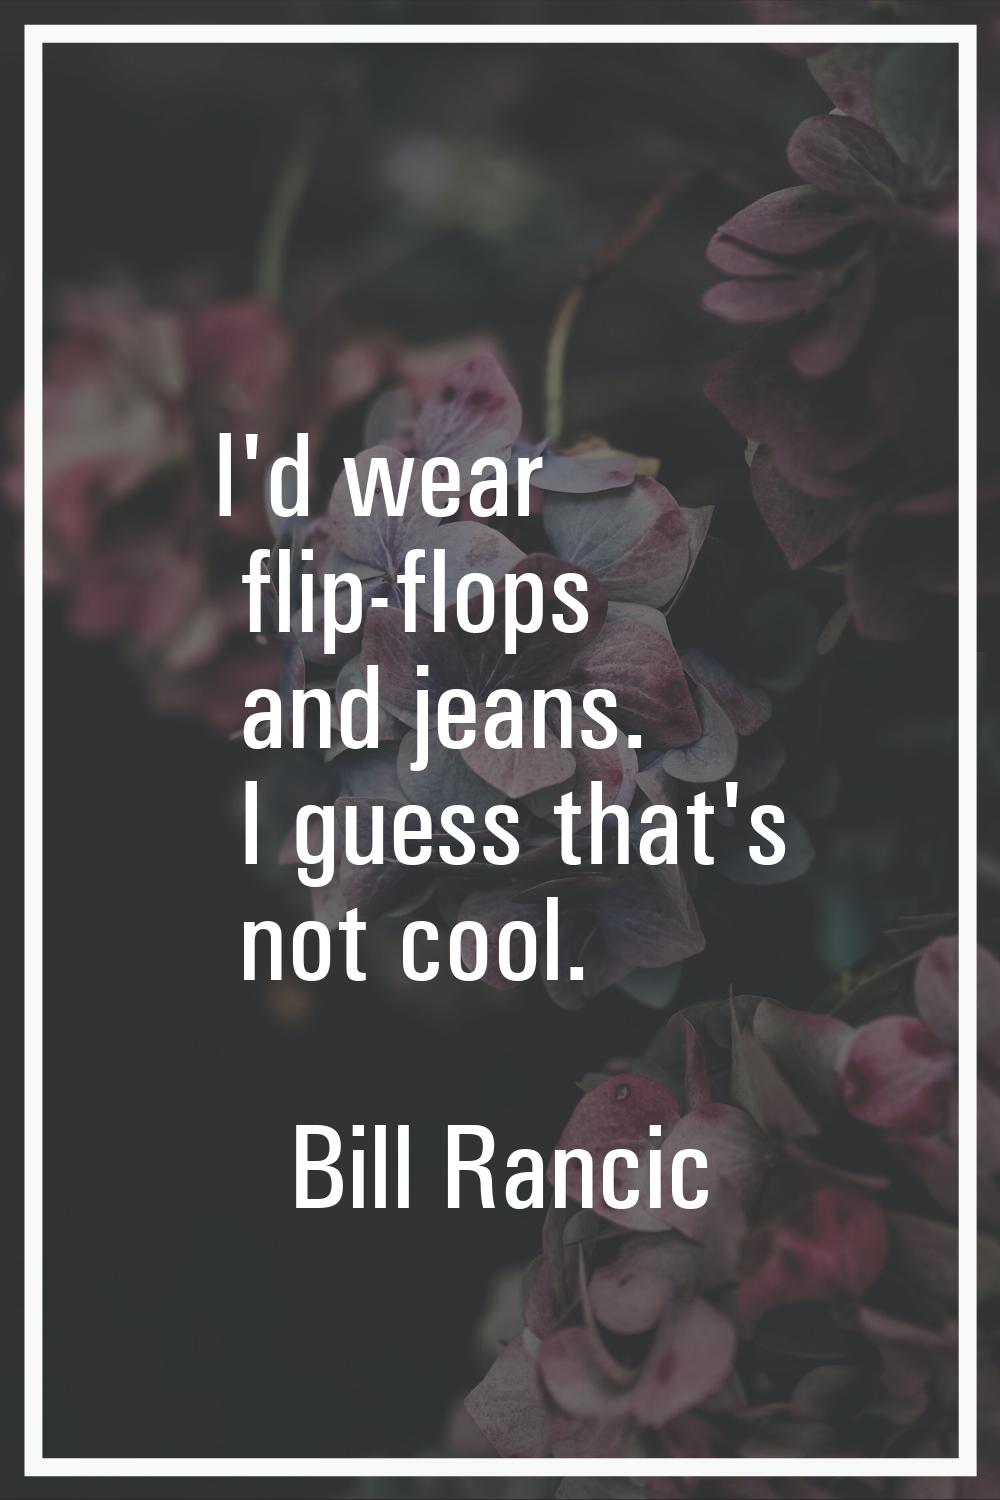 I'd wear flip-flops and jeans. I guess that's not cool.